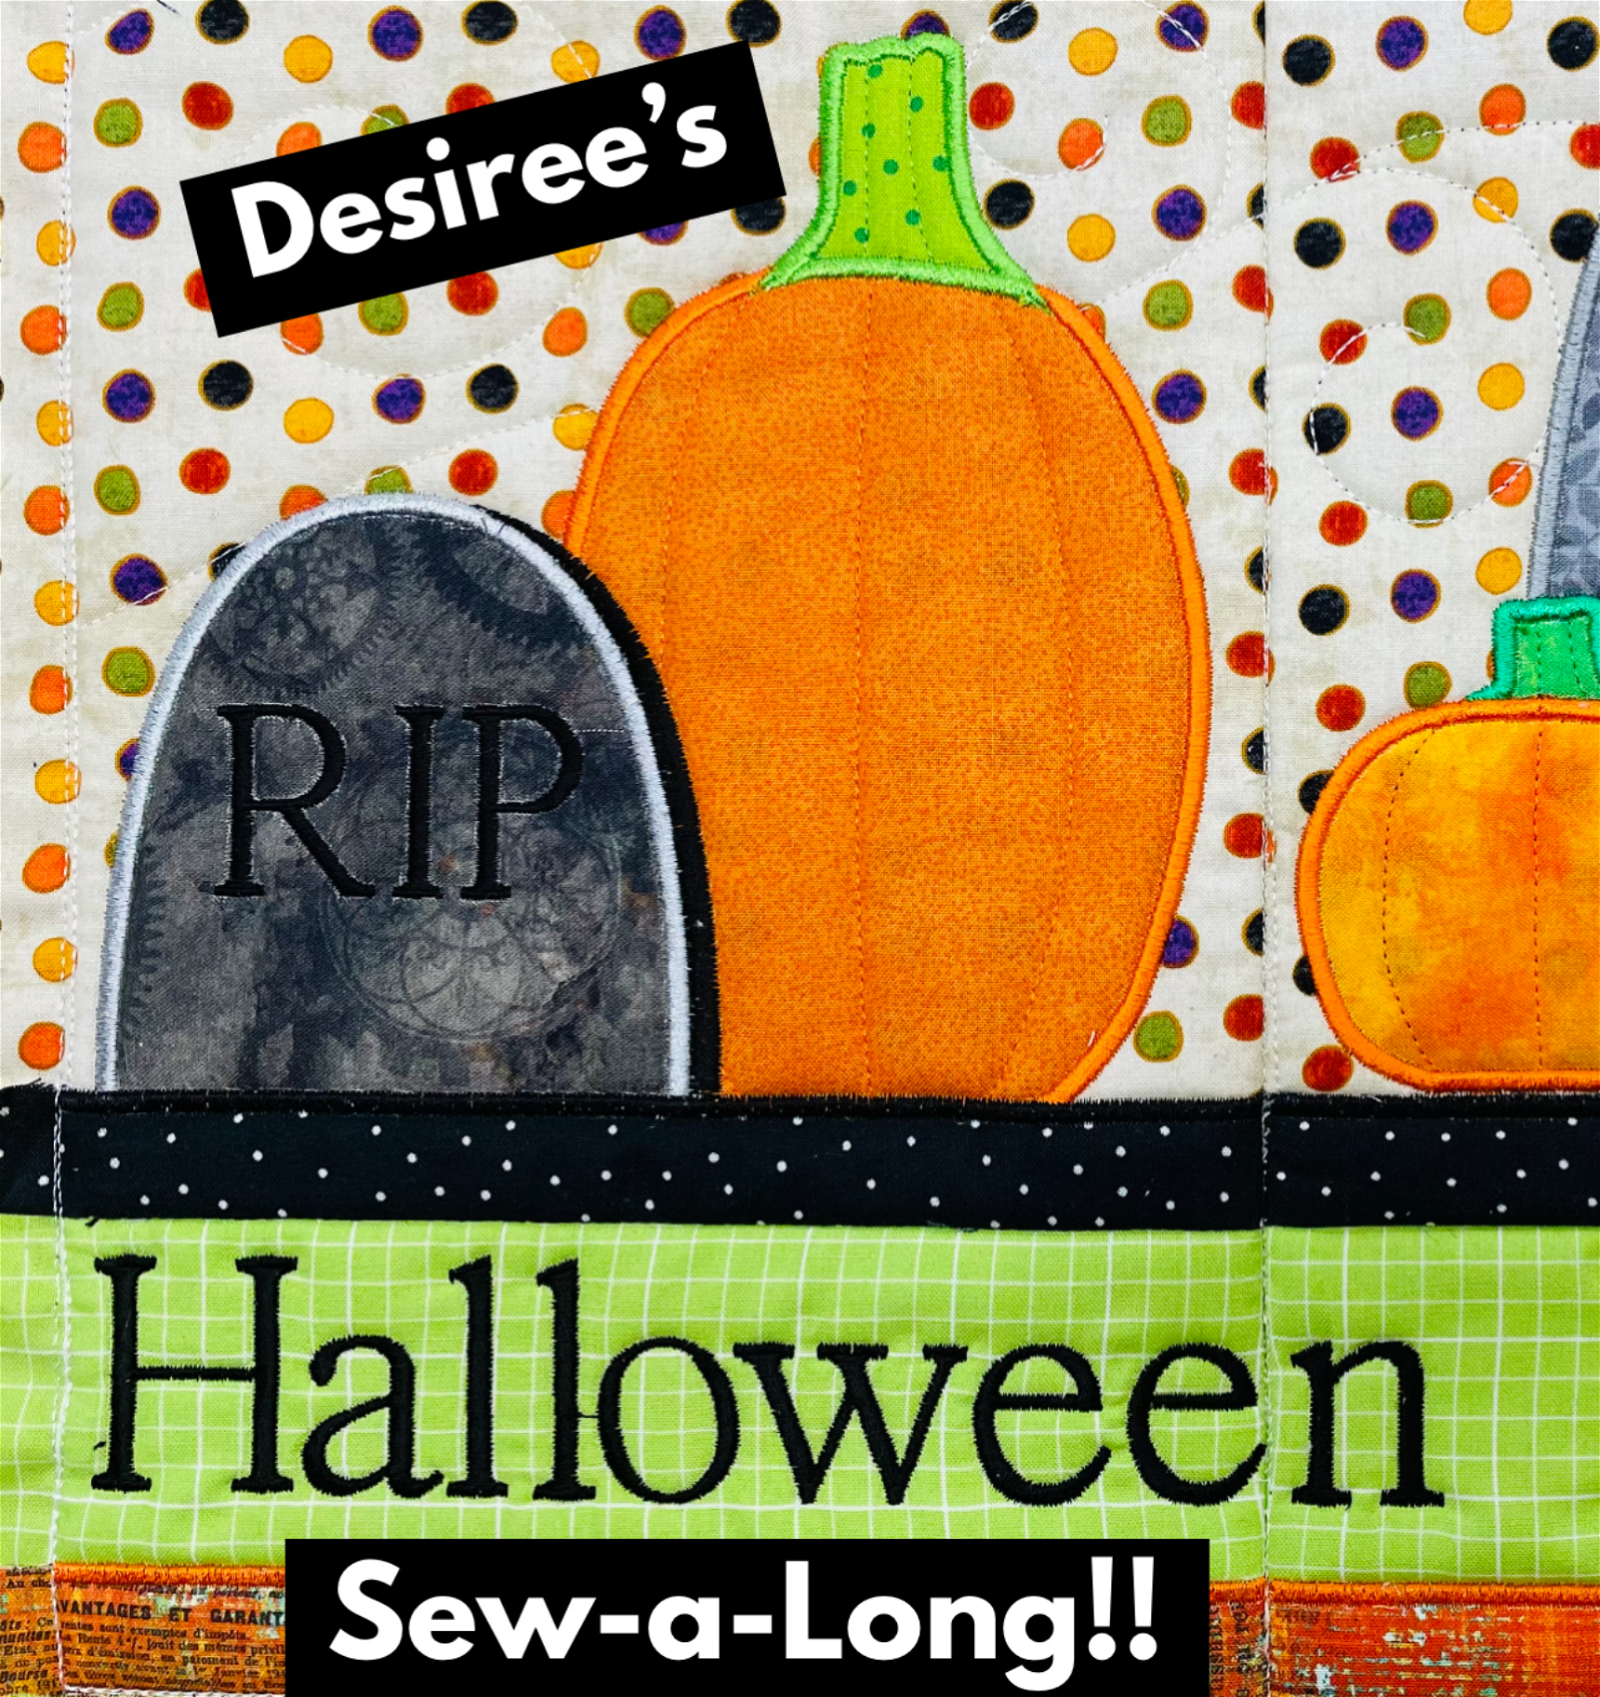 Desiree's Mystery Halloween Party Bus Quilt Sew-a-Long